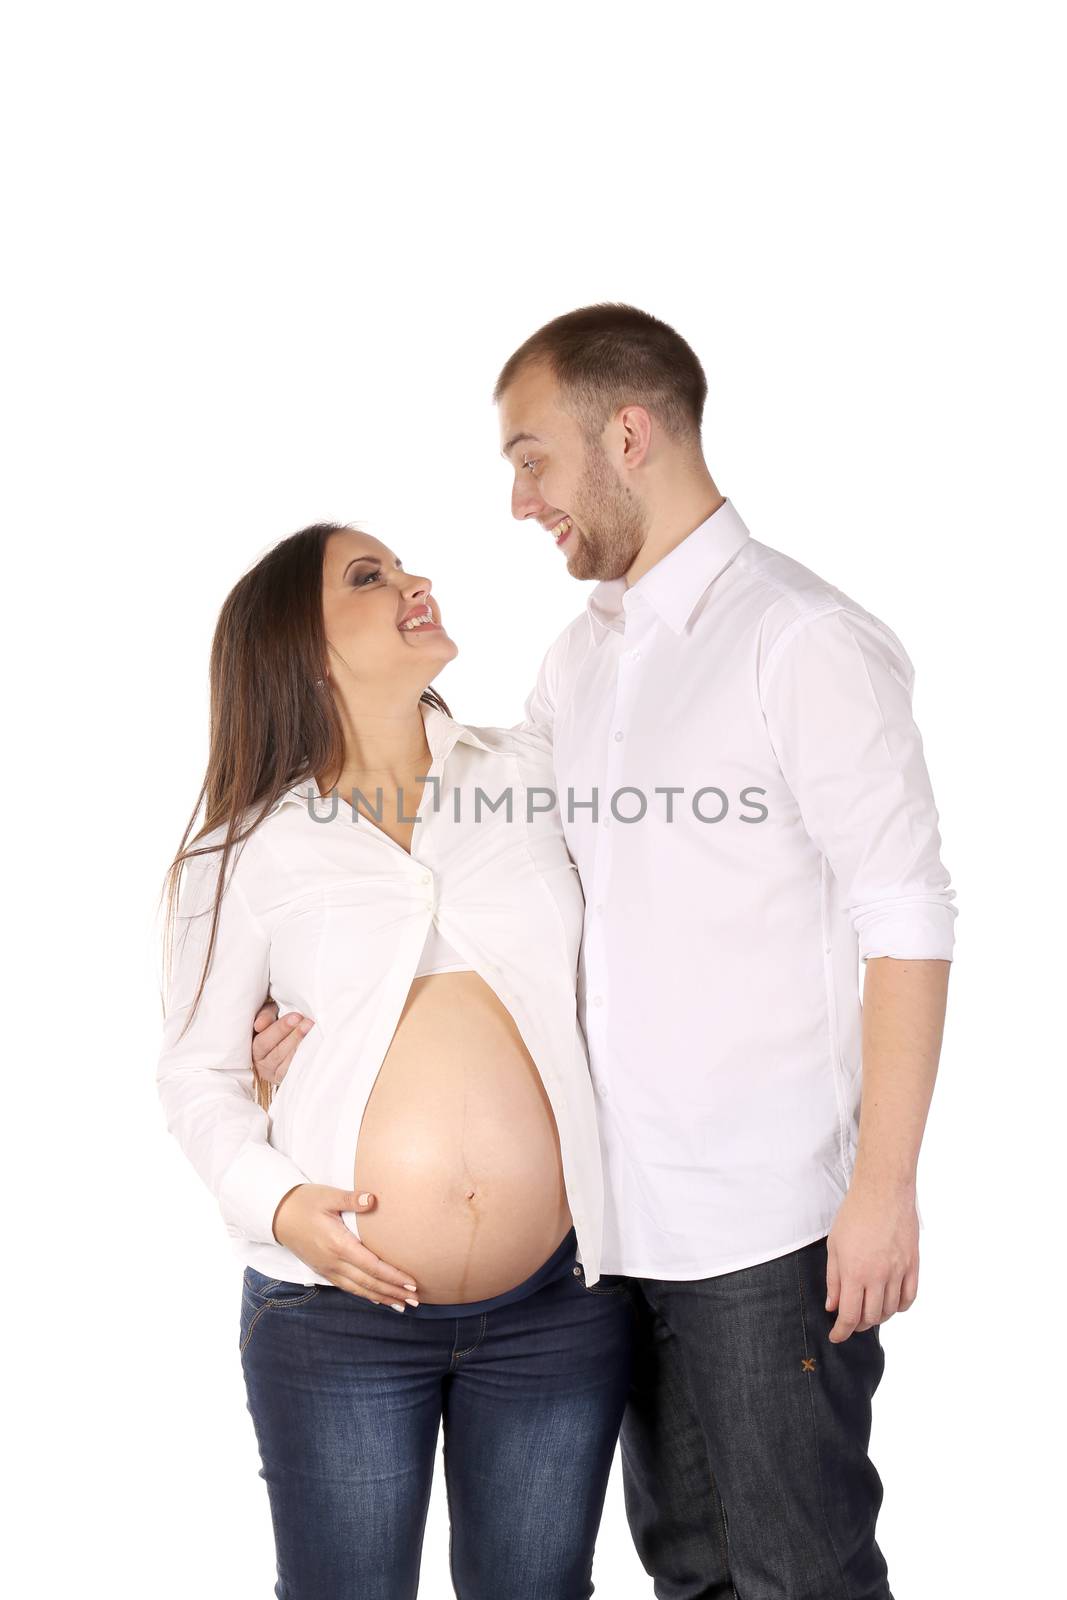 Laughing couple expecting baby. Isolated on a white background.